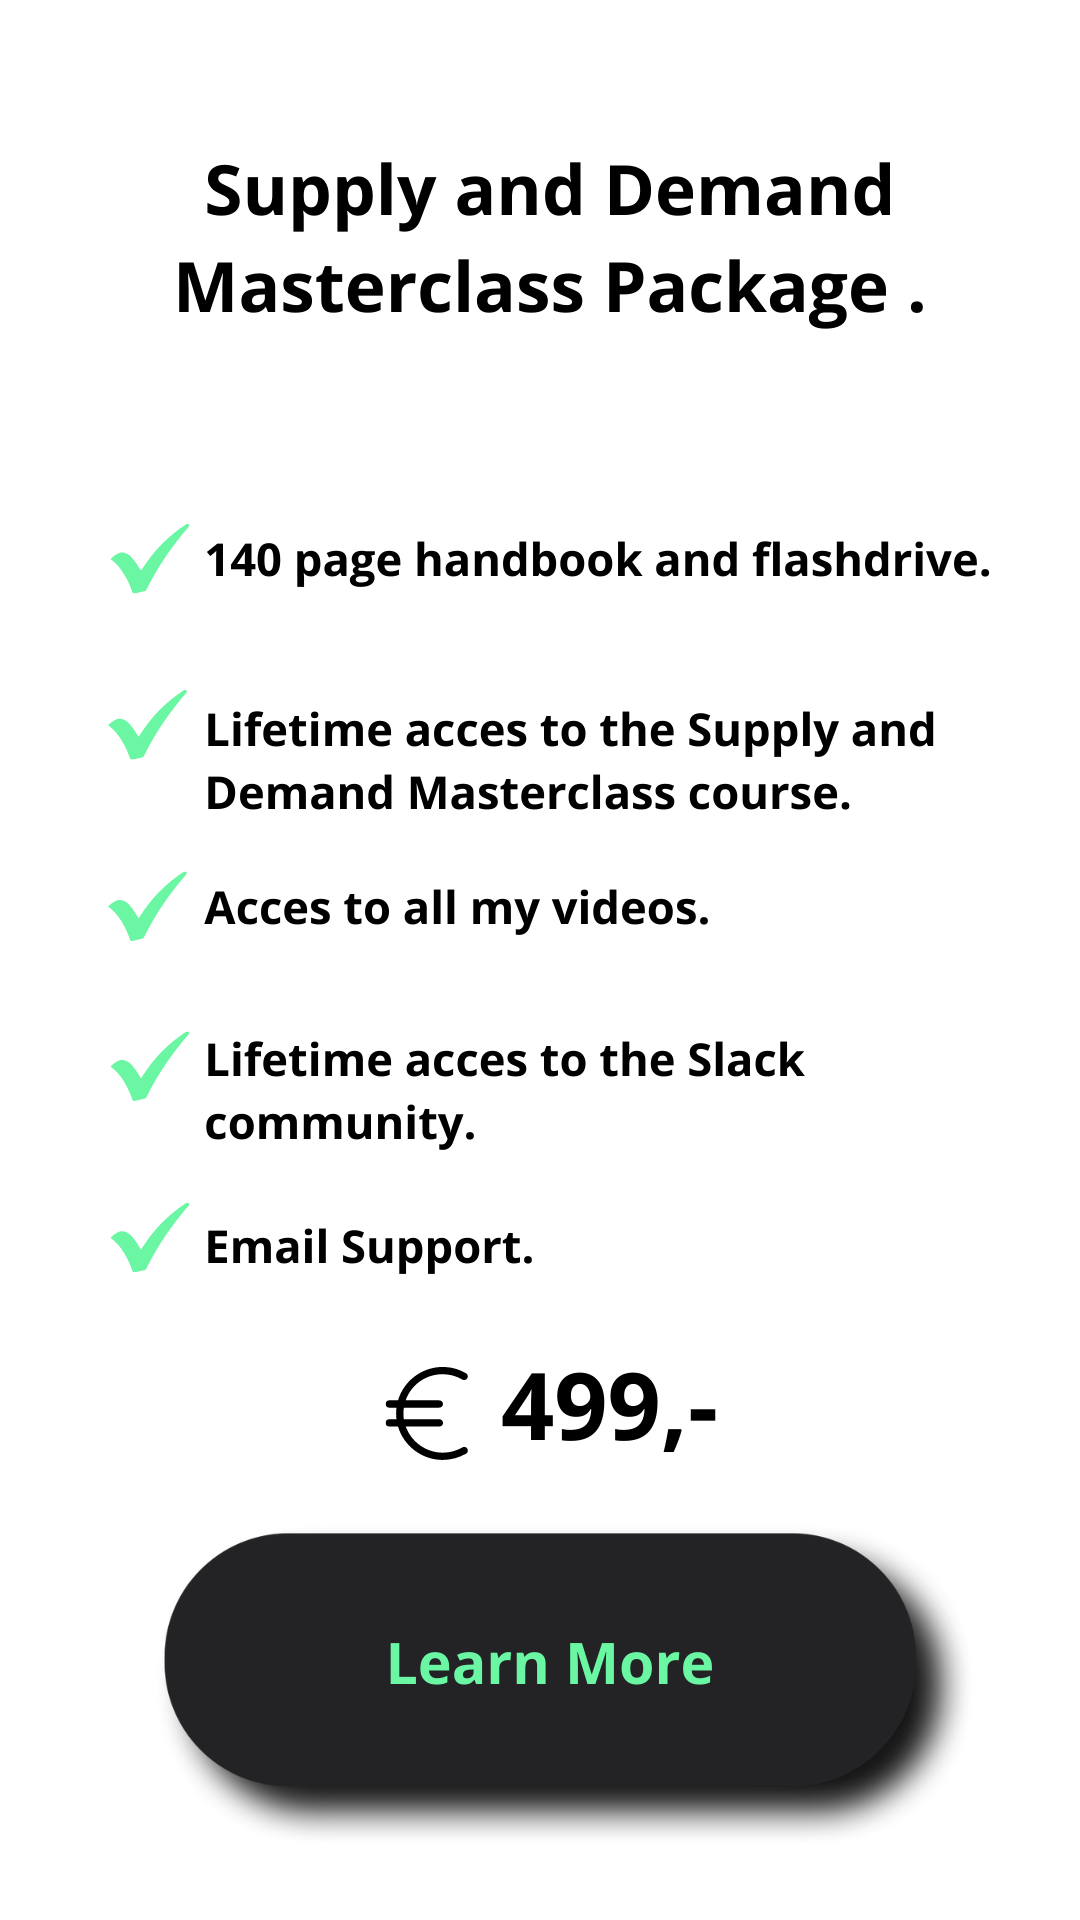 Supply and Demand Masterclass package